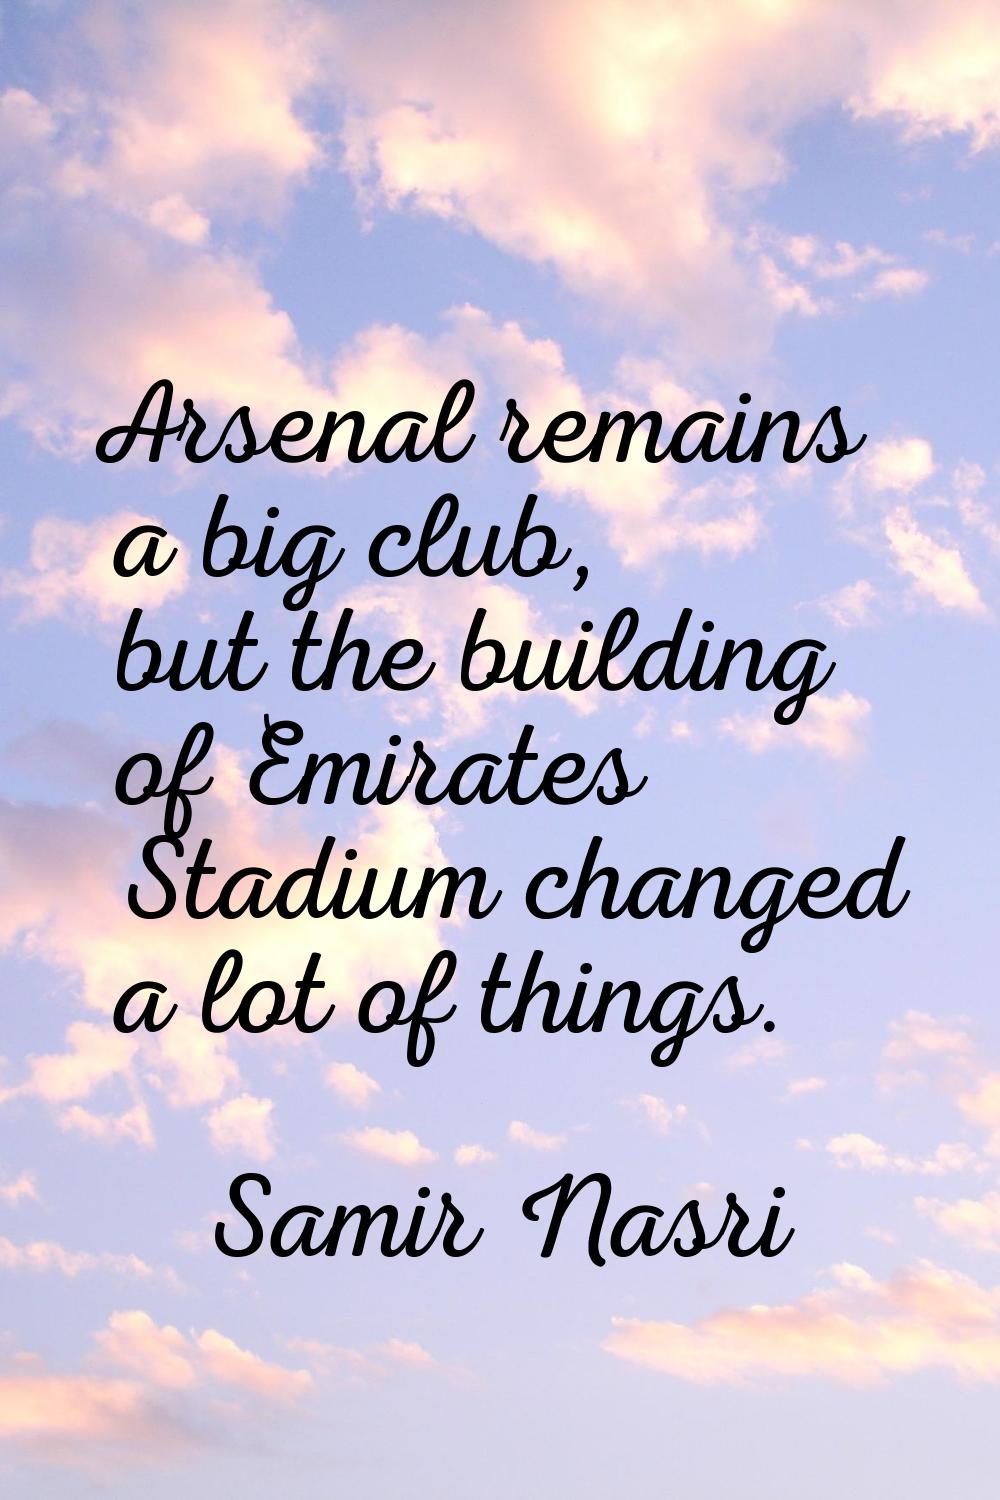 Arsenal remains a big club, but the building of Emirates Stadium changed a lot of things.